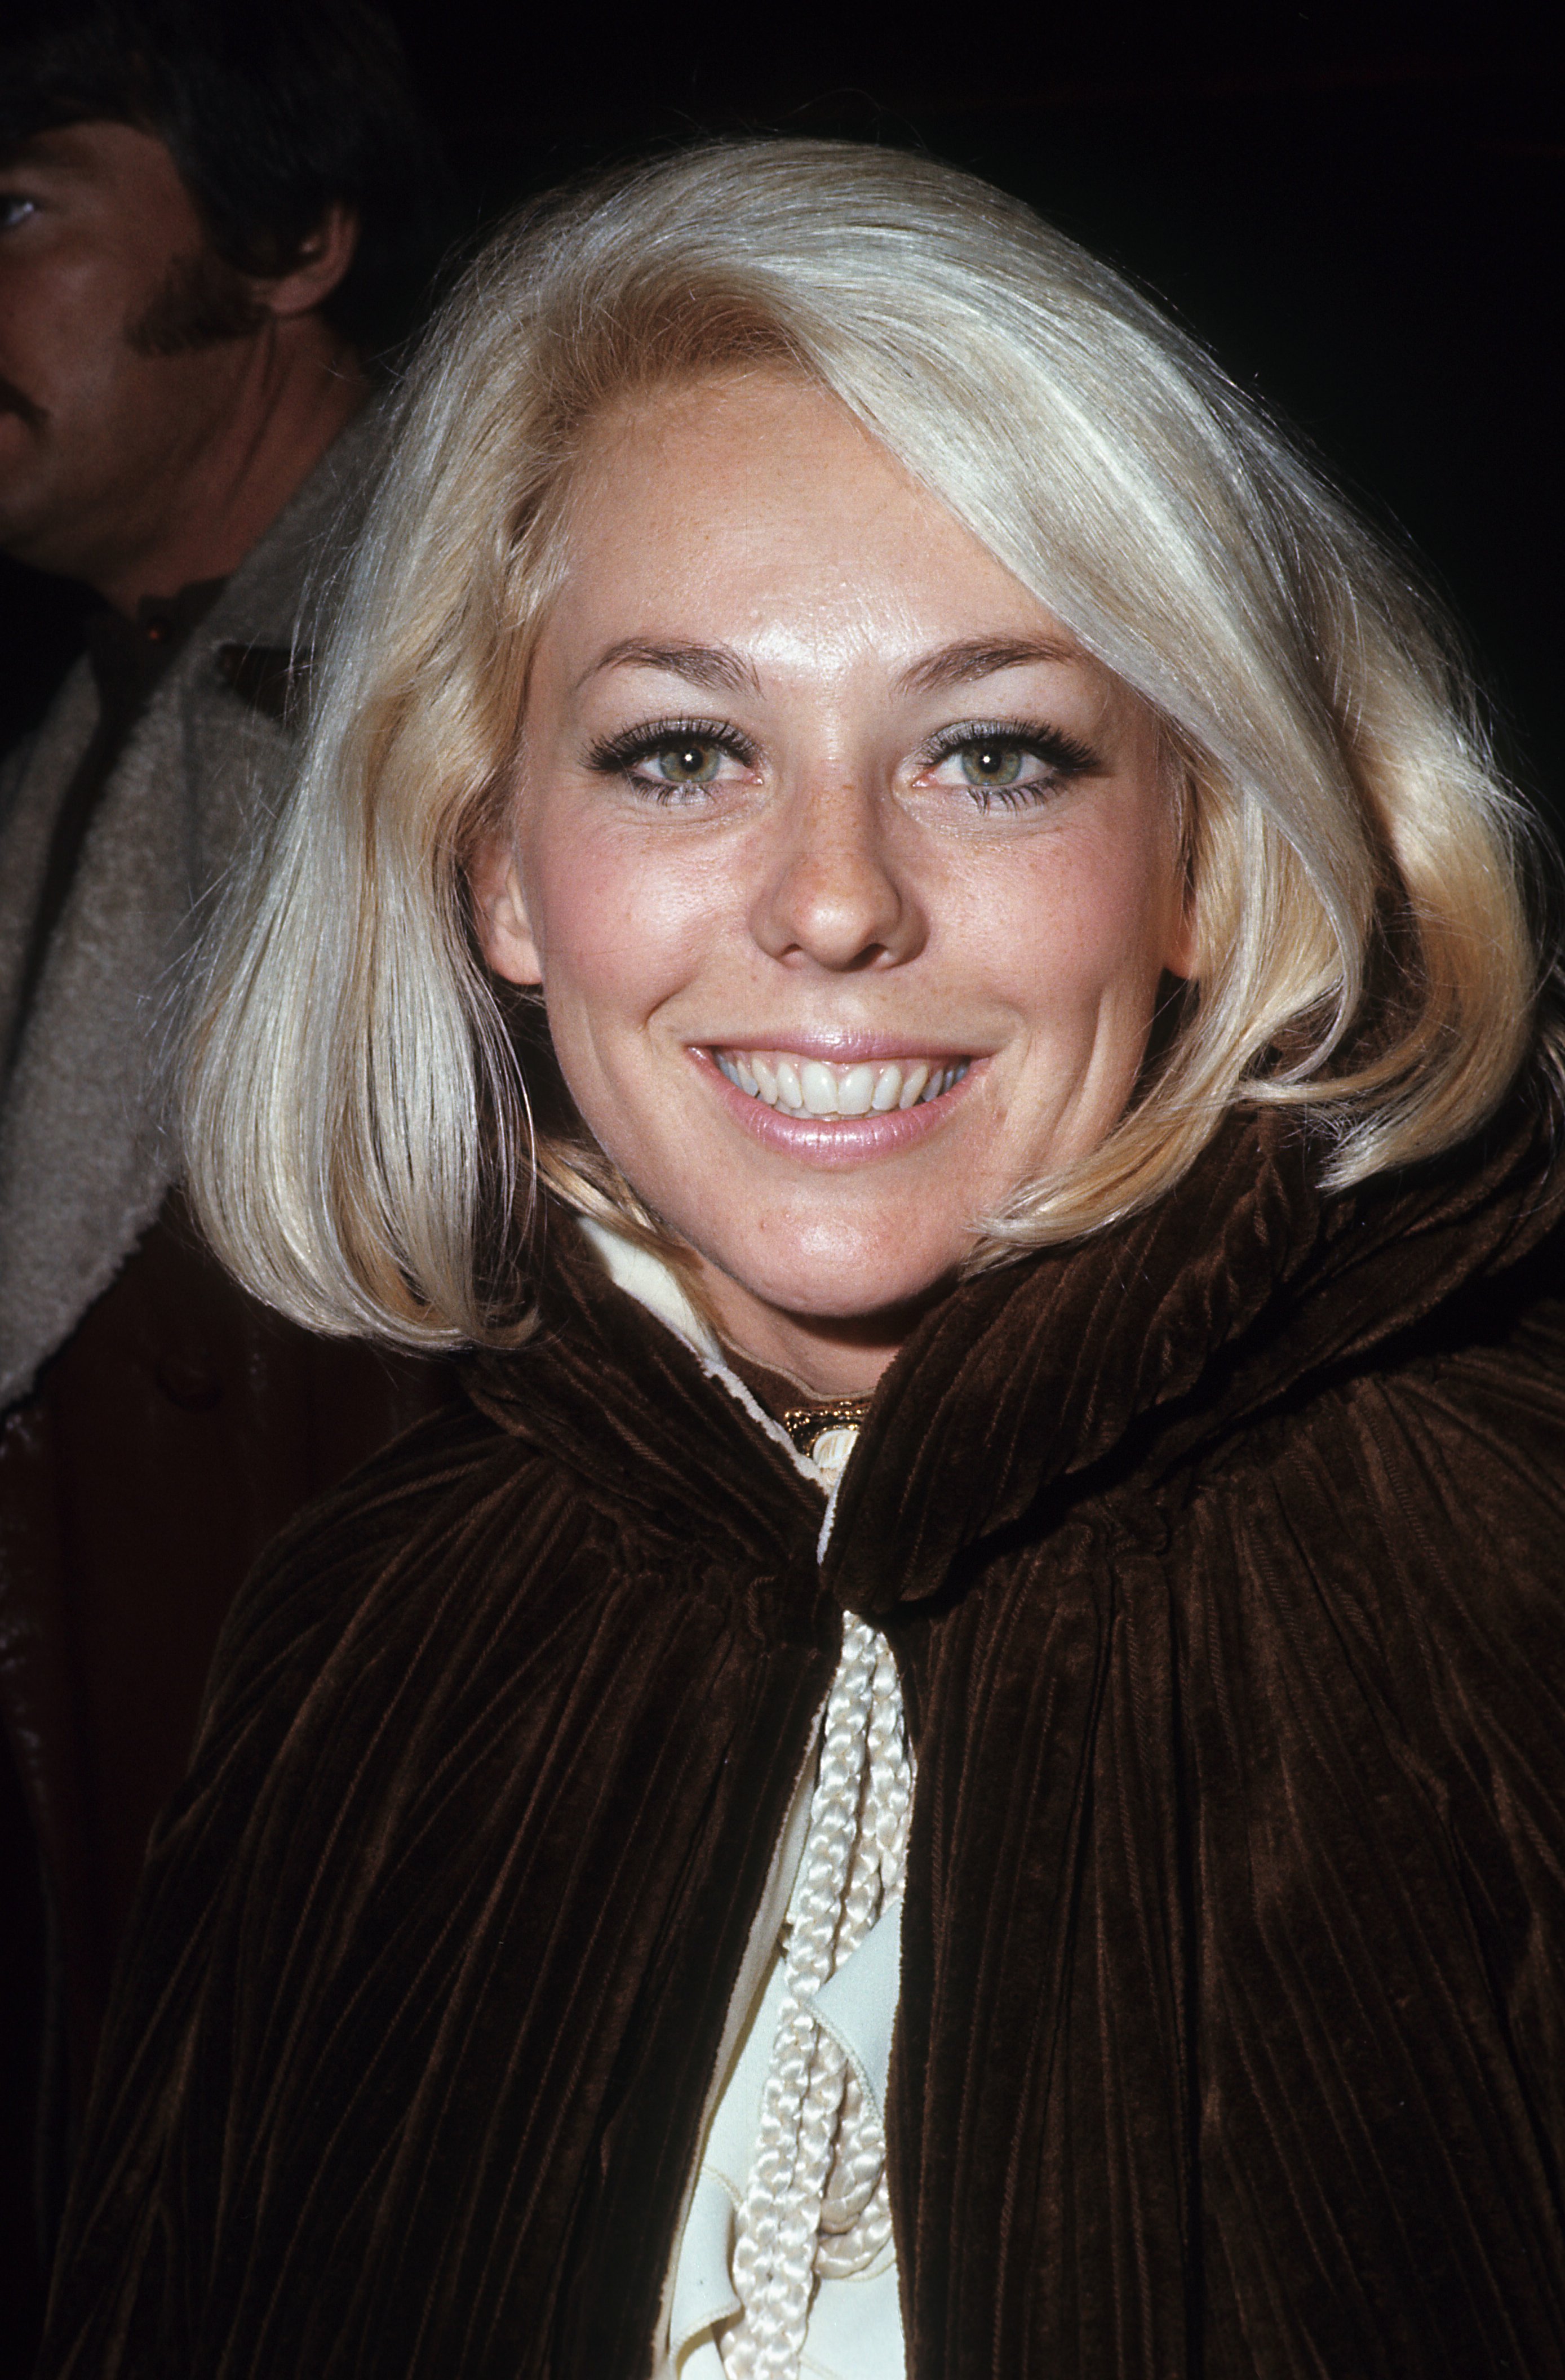 Tina Cole, 1970 | Source: Getty Images